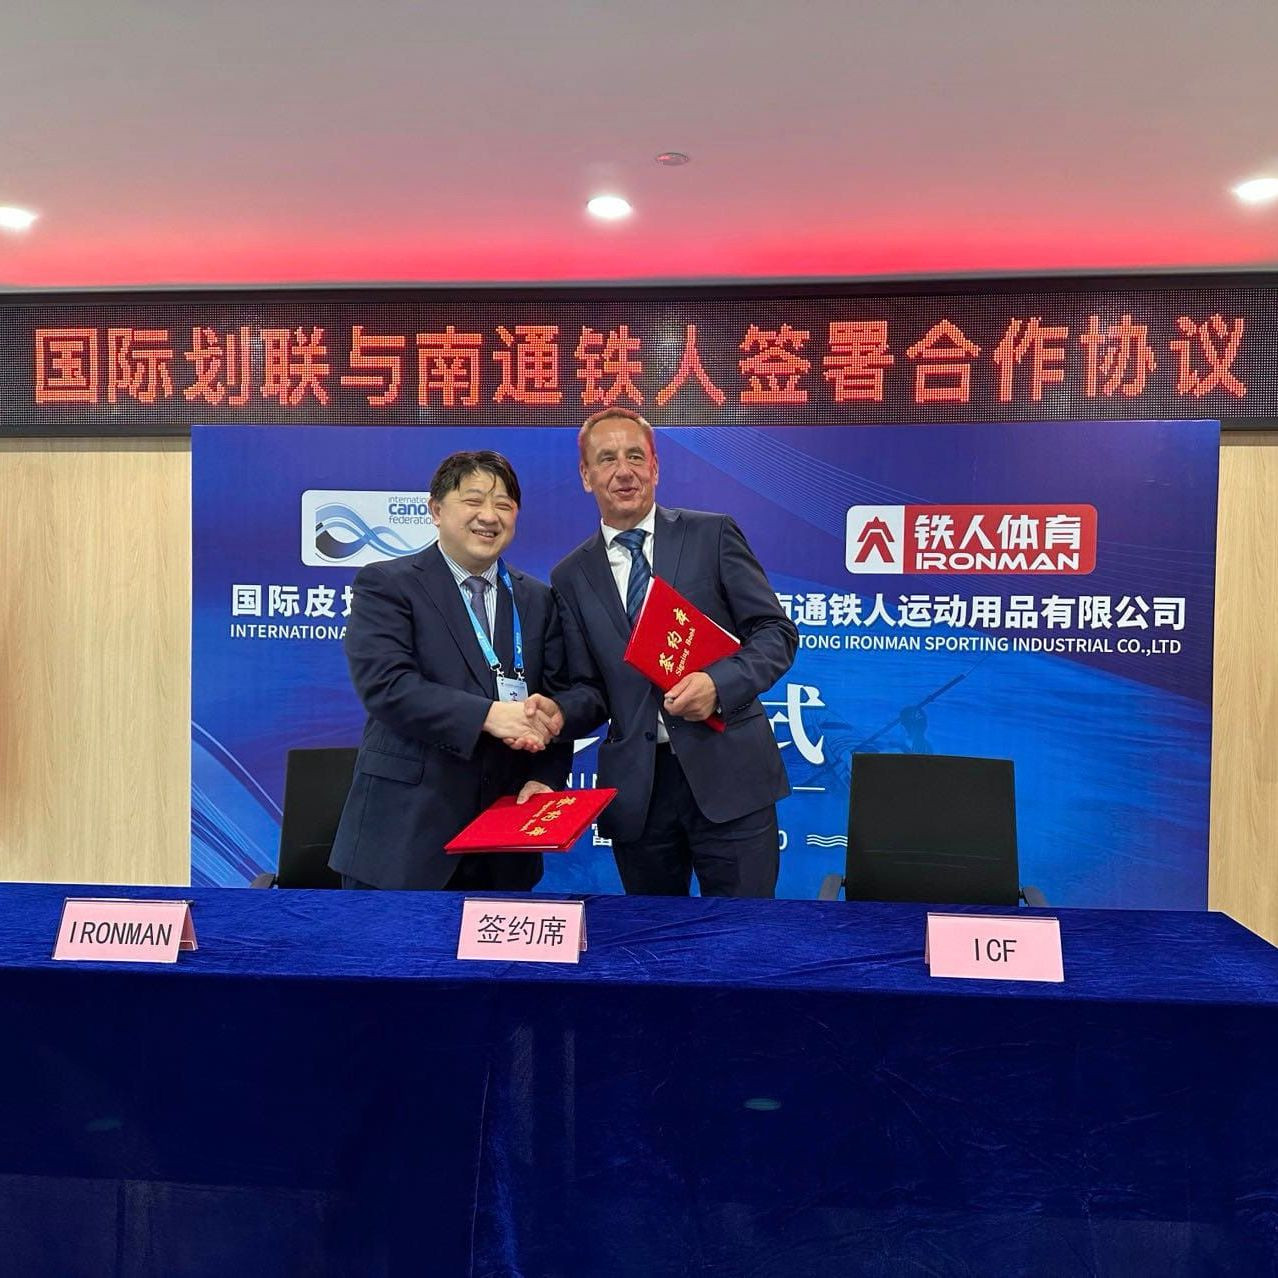 Nantong Tieren Sports Goods is one of three Chinese enterprises the ICF has entered a two-year agreement with ©ICF/Twitter